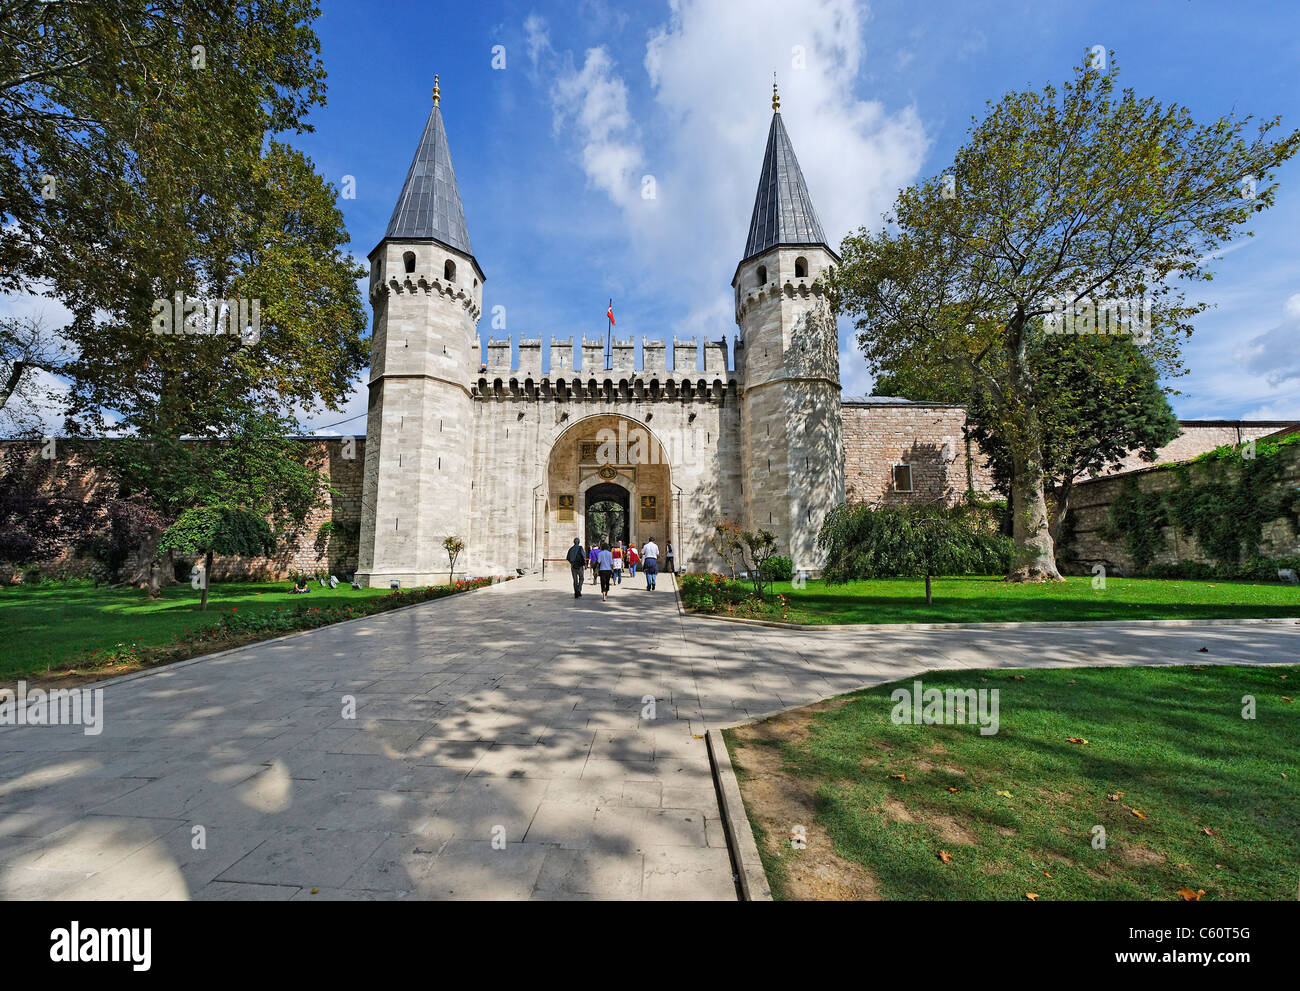 The Gate of Salutations: main entrance to the Topkapi Palace in Istanbul. Stock Photo